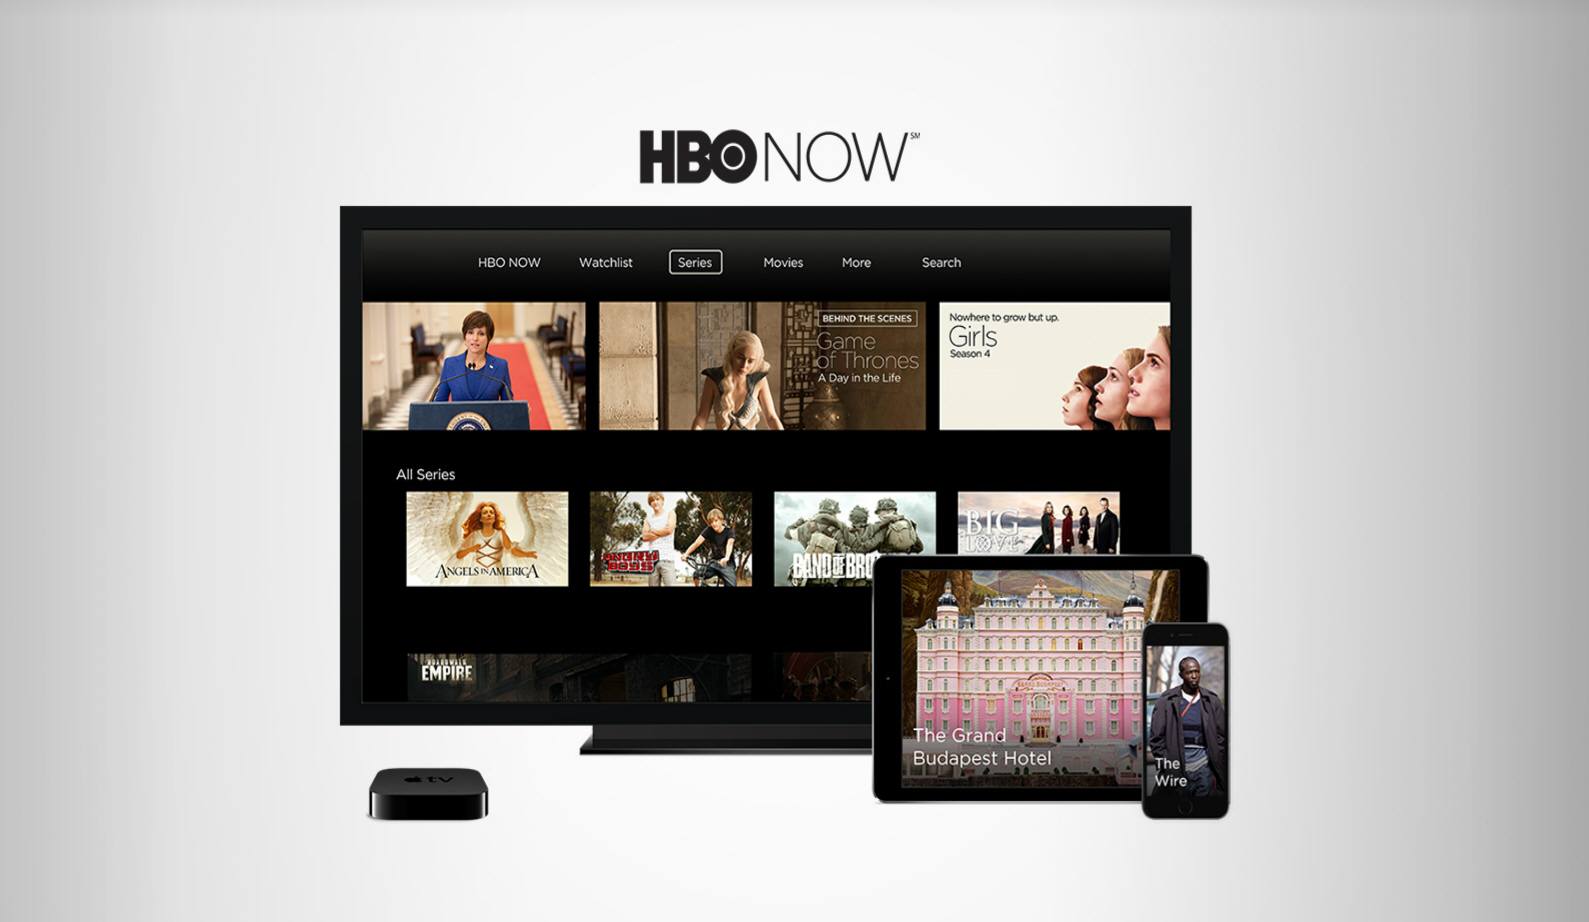 Amazon Fire Will Drop HBO Now Support This Week